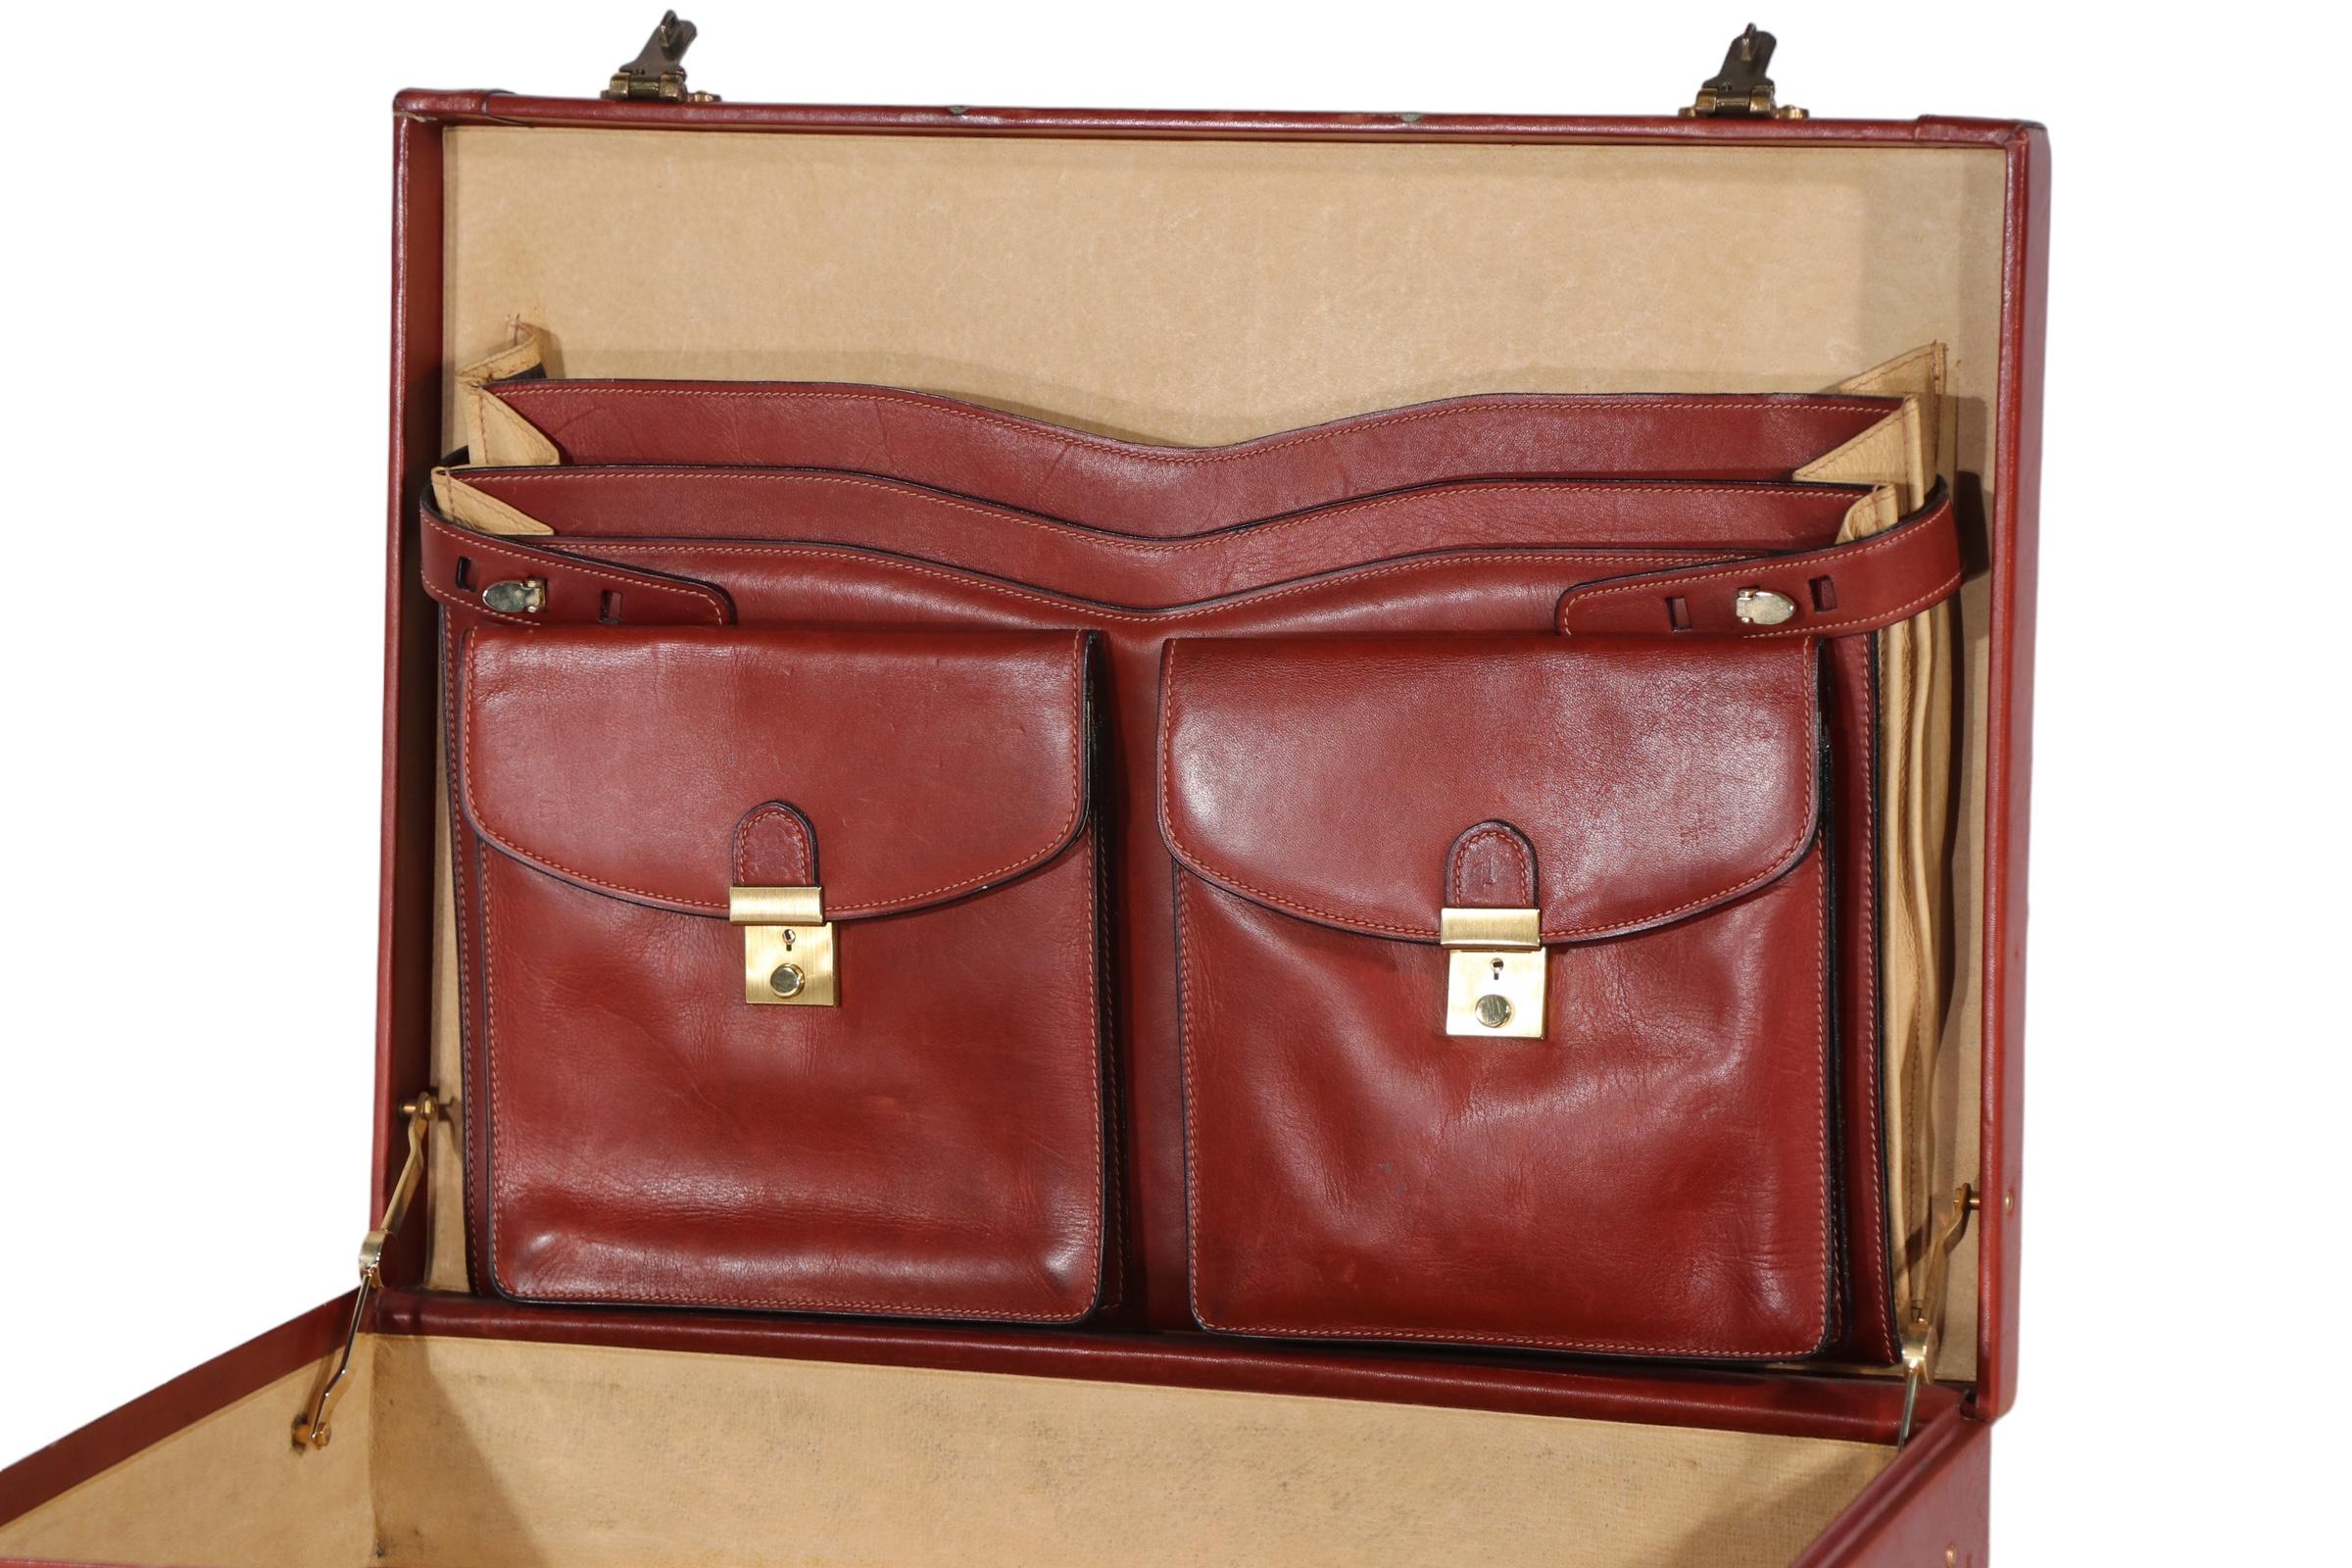  Mid Century Art Deco Hard Case Leather Attache Briefcase  after Bally, Hermes  For Sale 10